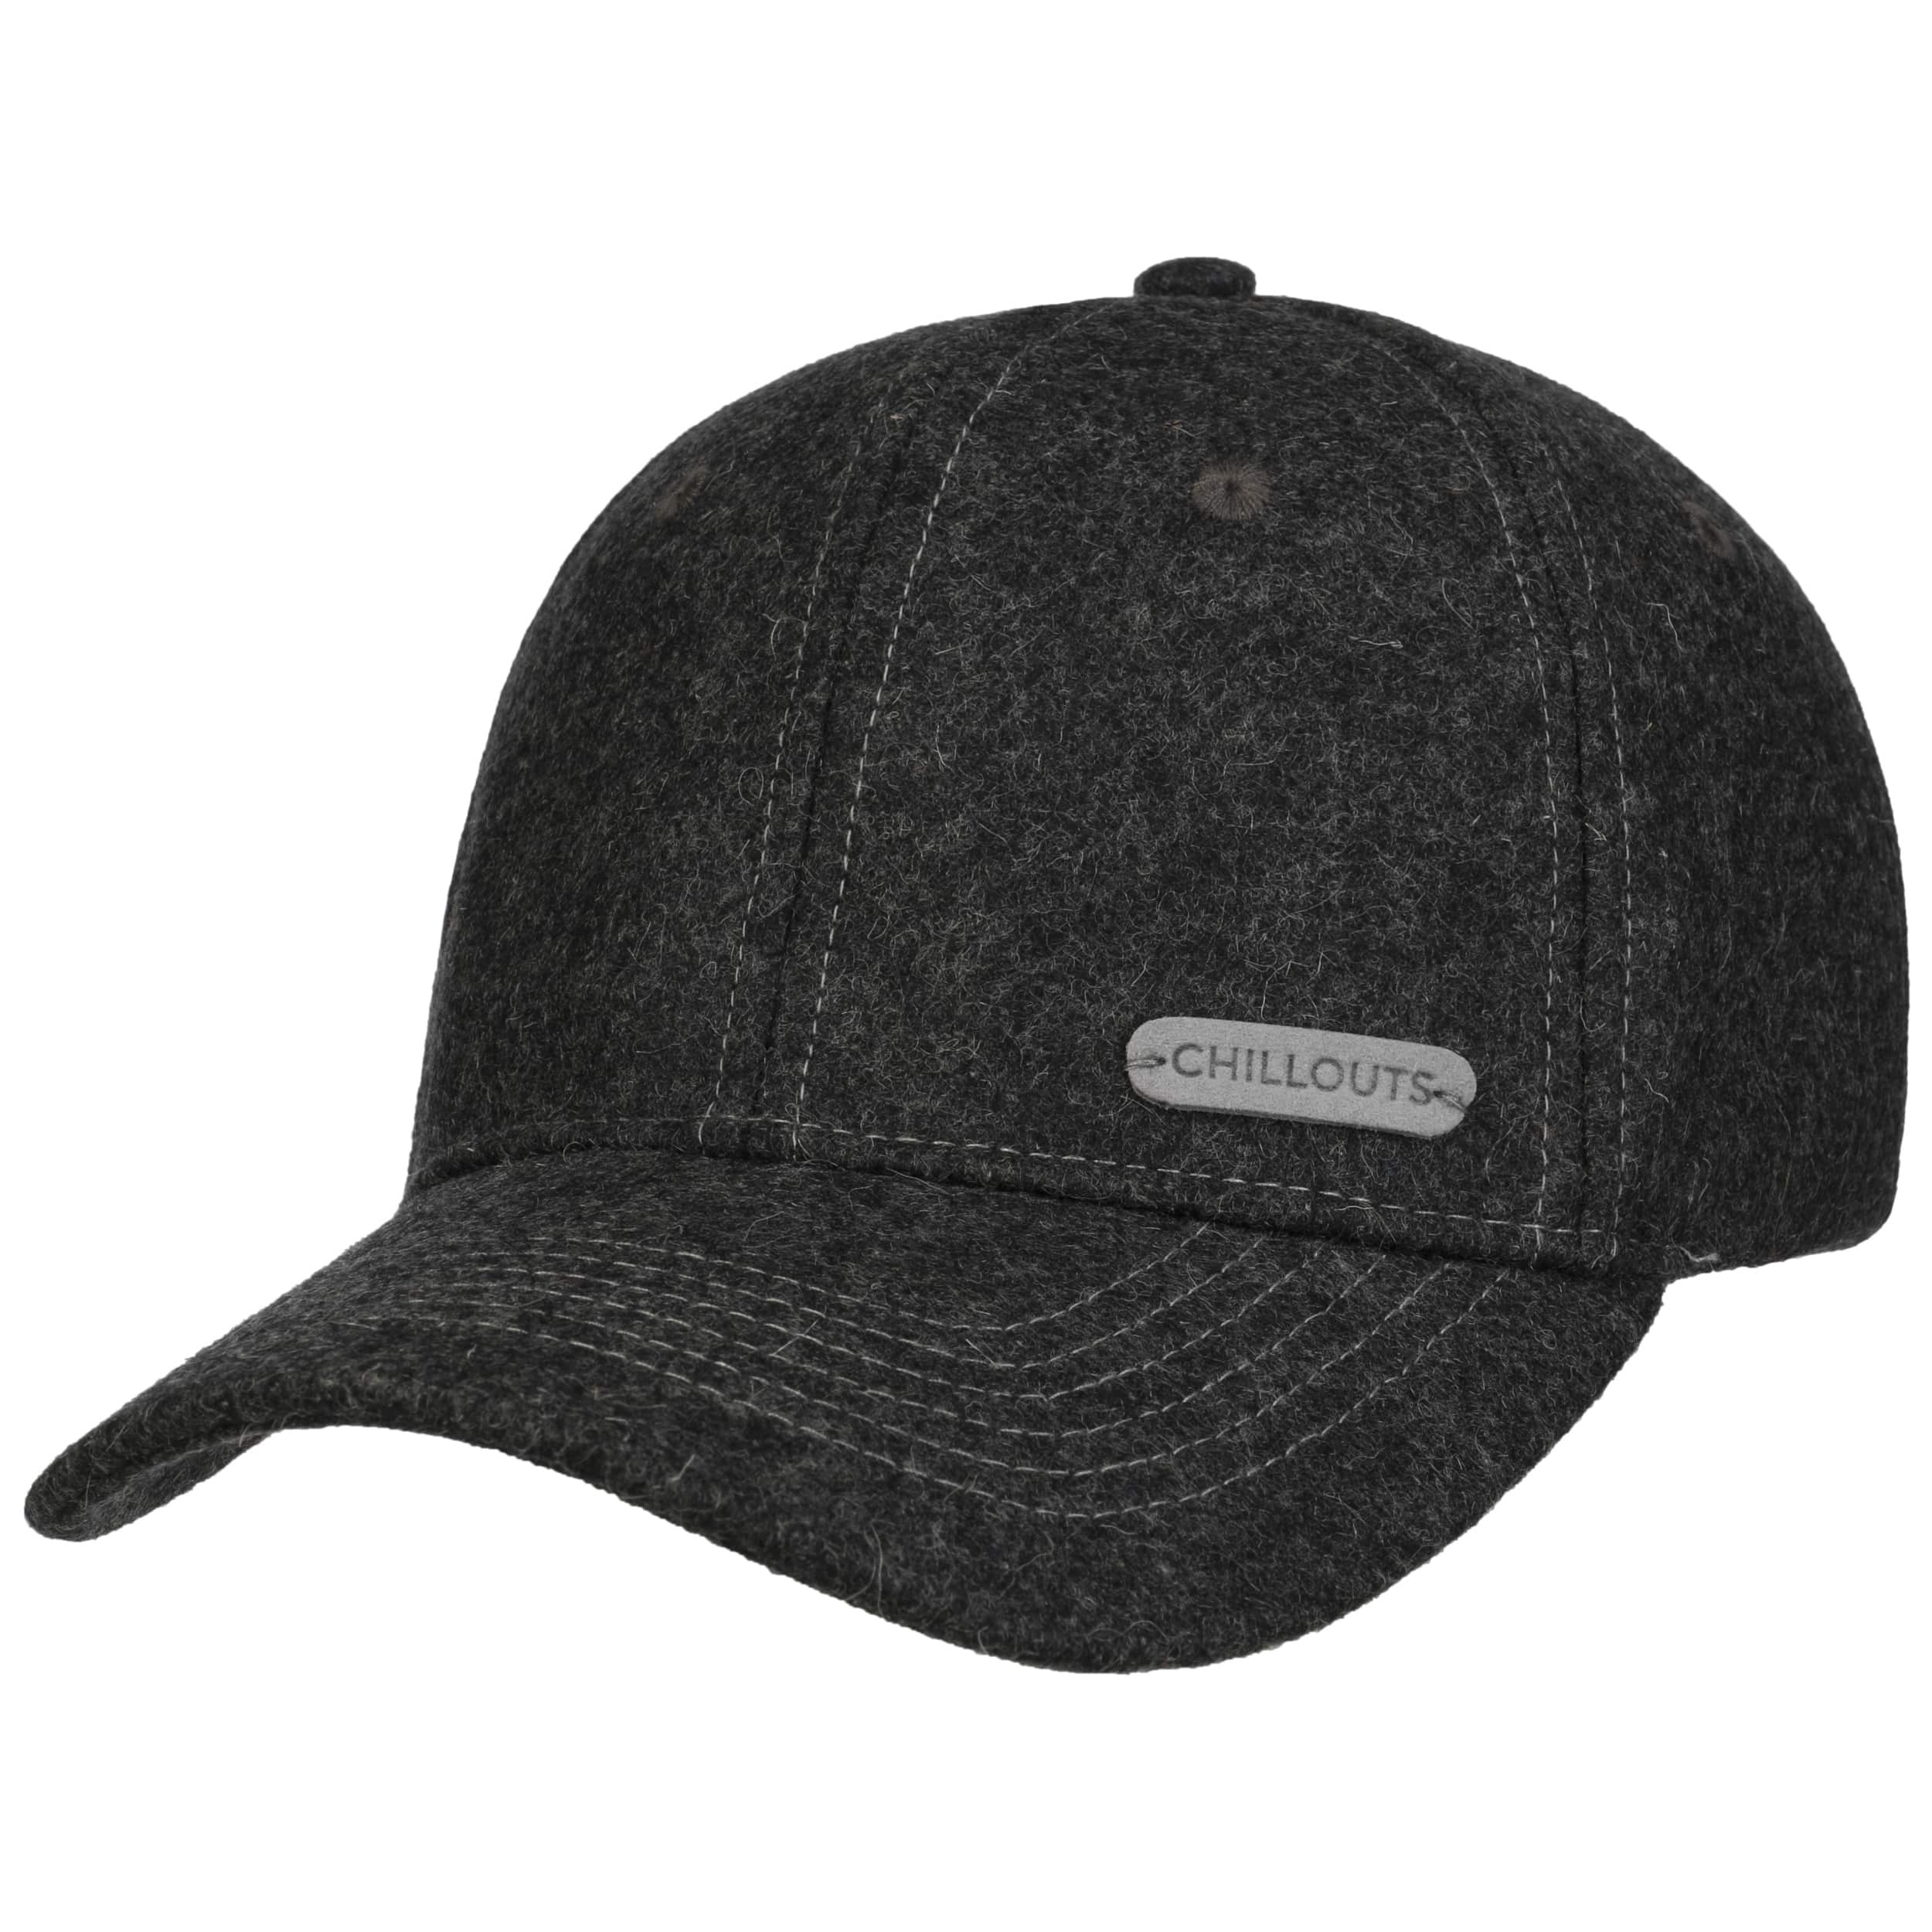 Cap by Chillouts 33,95 Matero CHF -